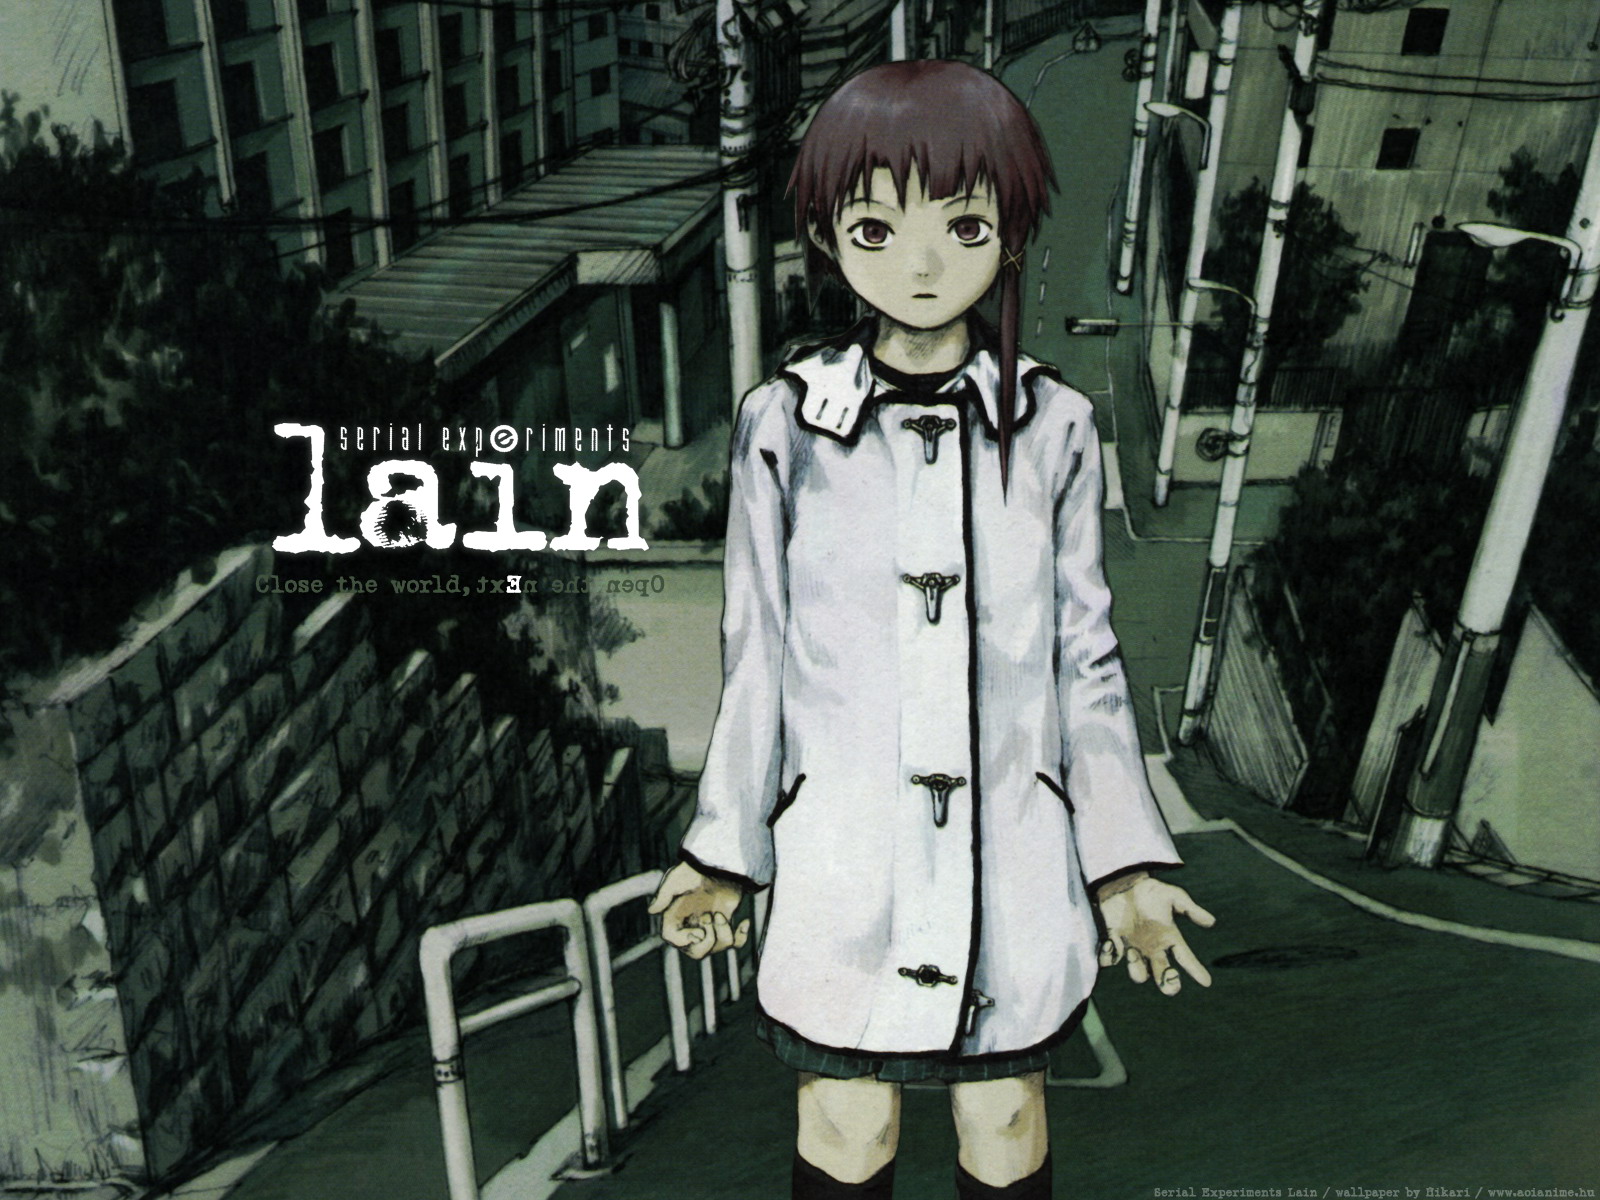 Serial Experiments Lain Ed S Space For His Rambling Thoughts